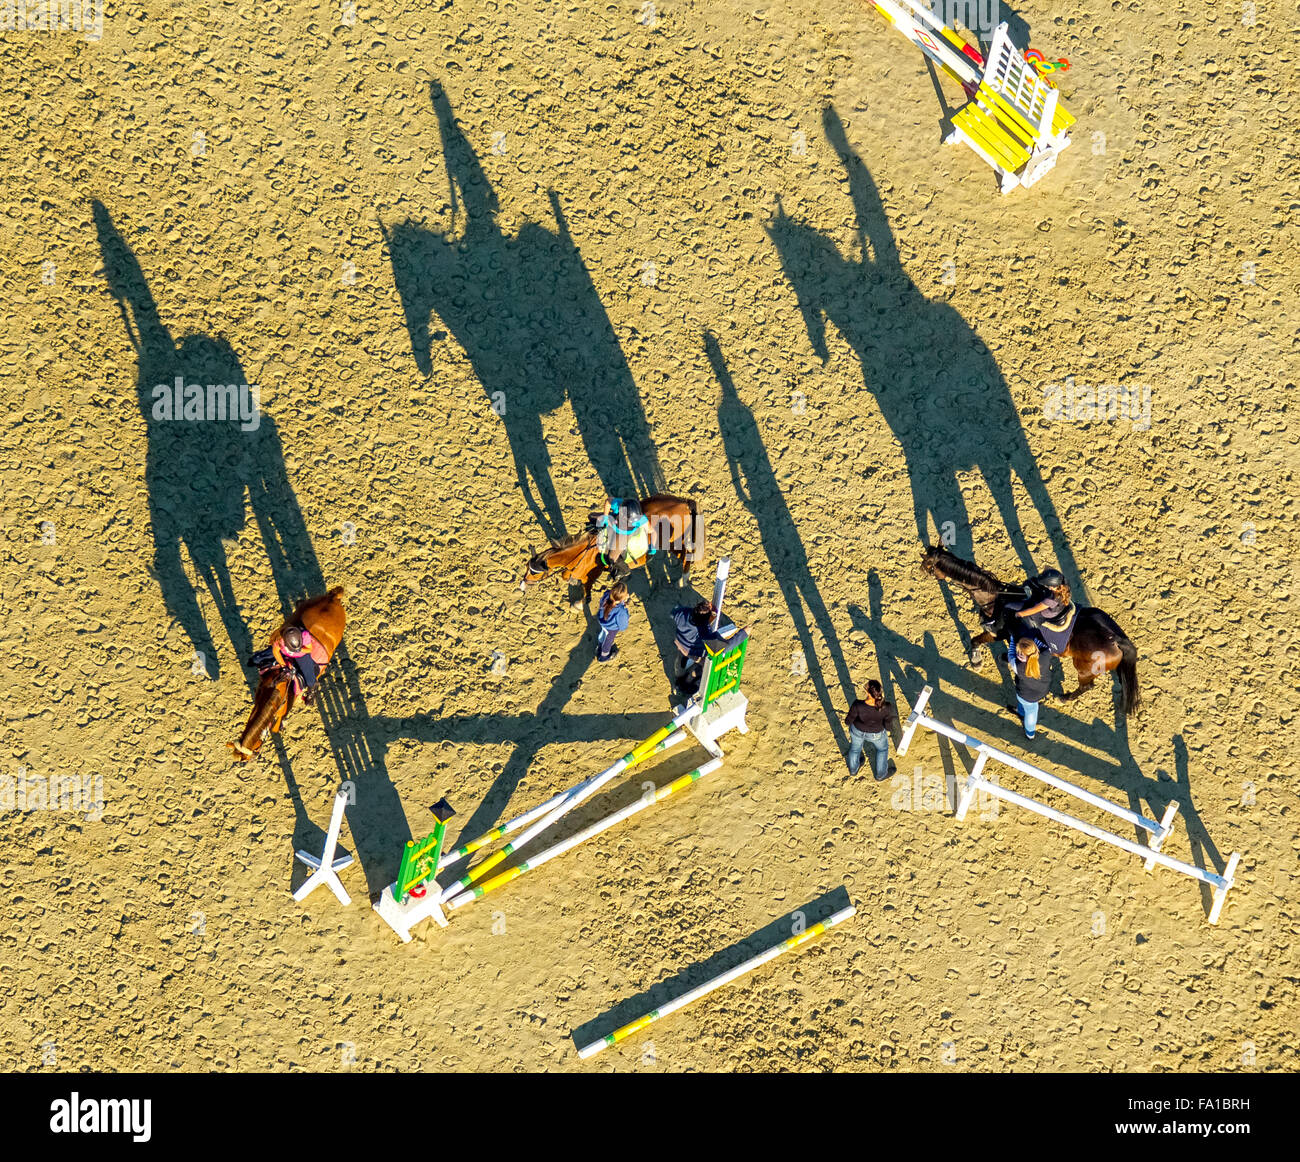 Obstacle Training with long shadows, riding facilities, Reiterhof Rhynern, riders, horses, barriers, Hamm, Ruhr area, Stock Photo